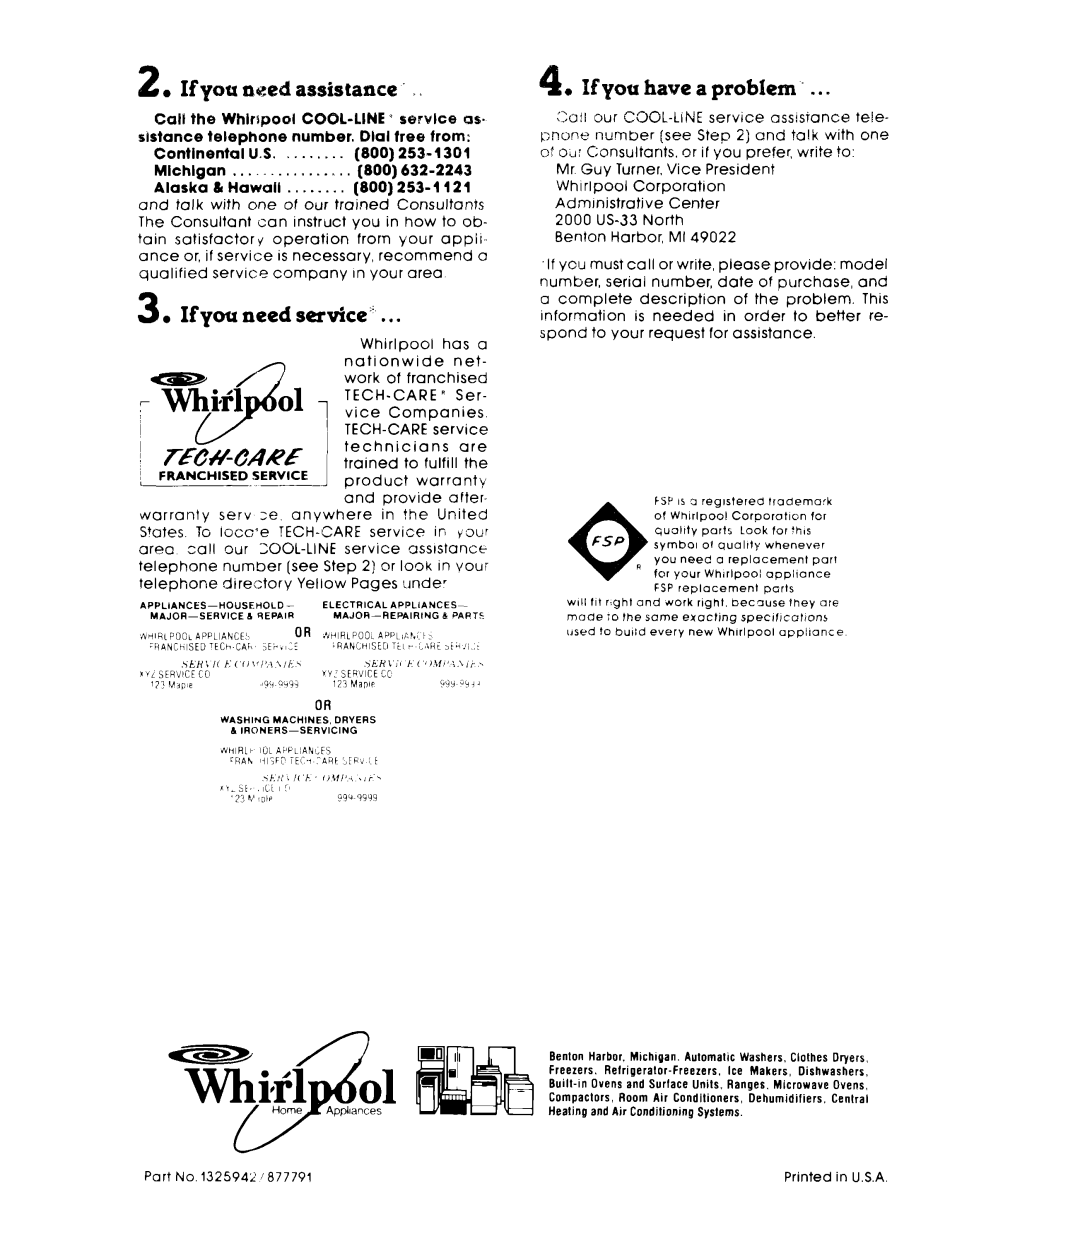 Whirlpool RF440XL manual If you ased assistance, need service’, If you have a problem, Ifyou 